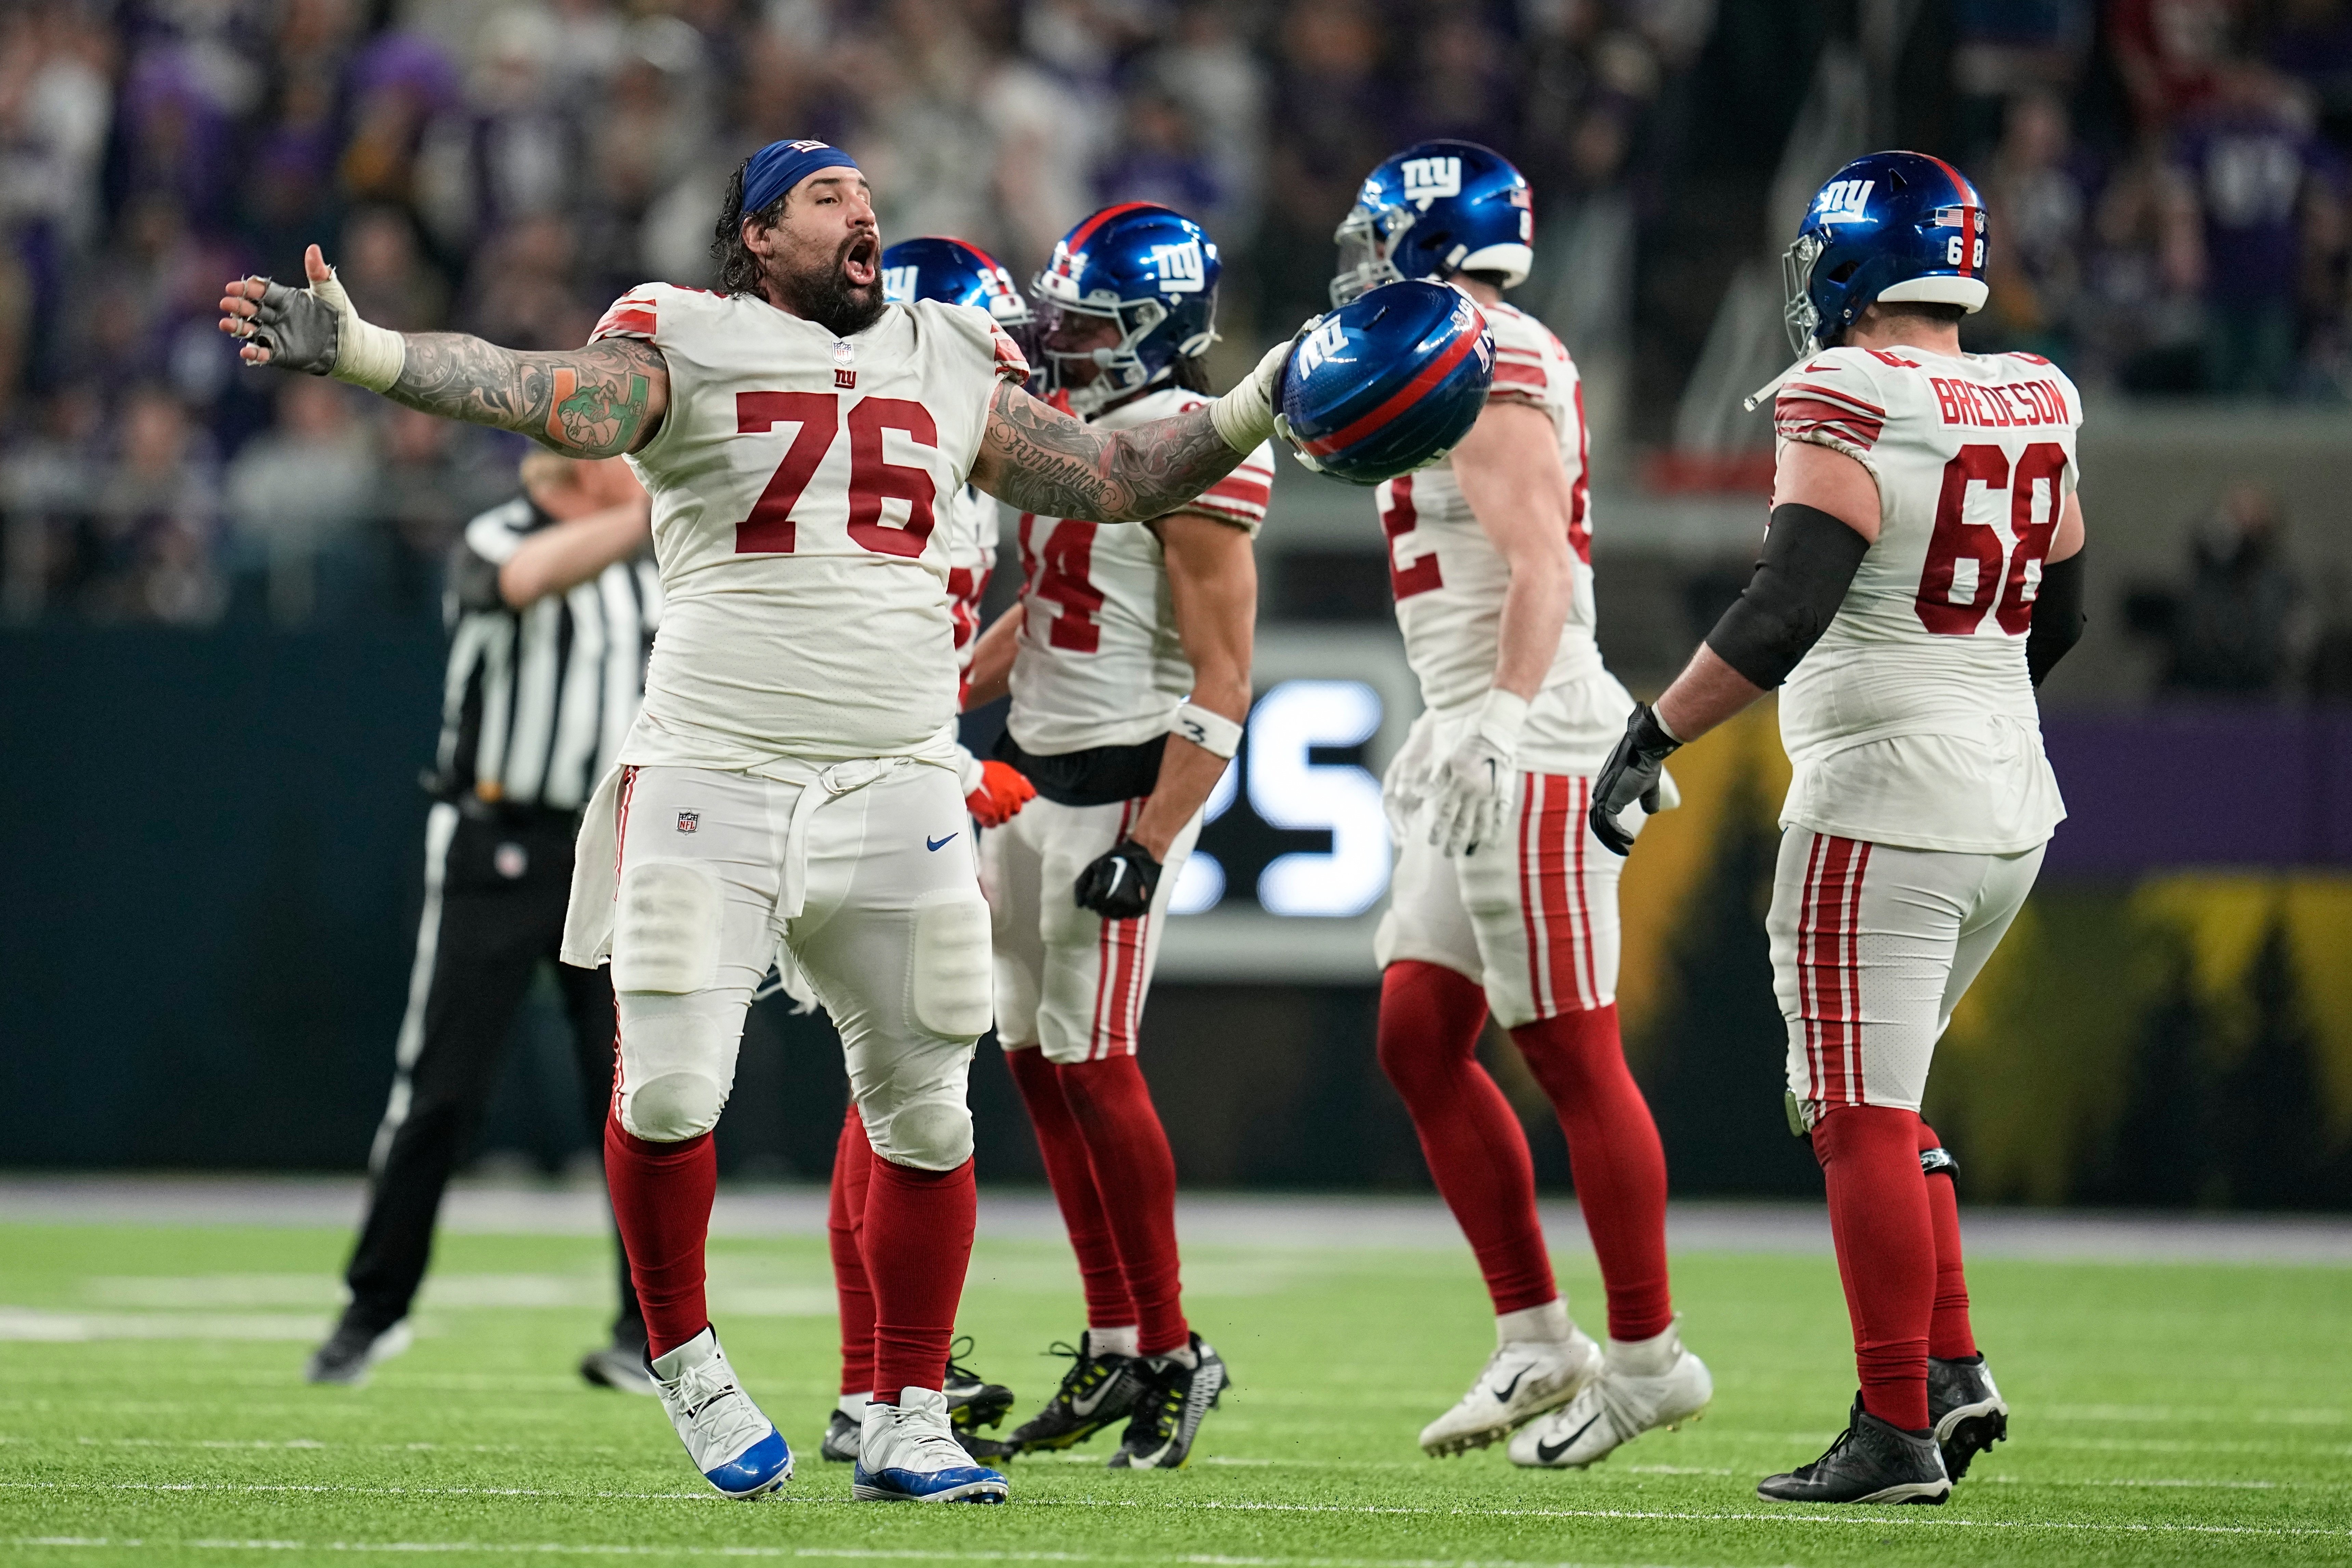  New York Giants end long wait for NFL play-off win by beating Minnesota Vikings 